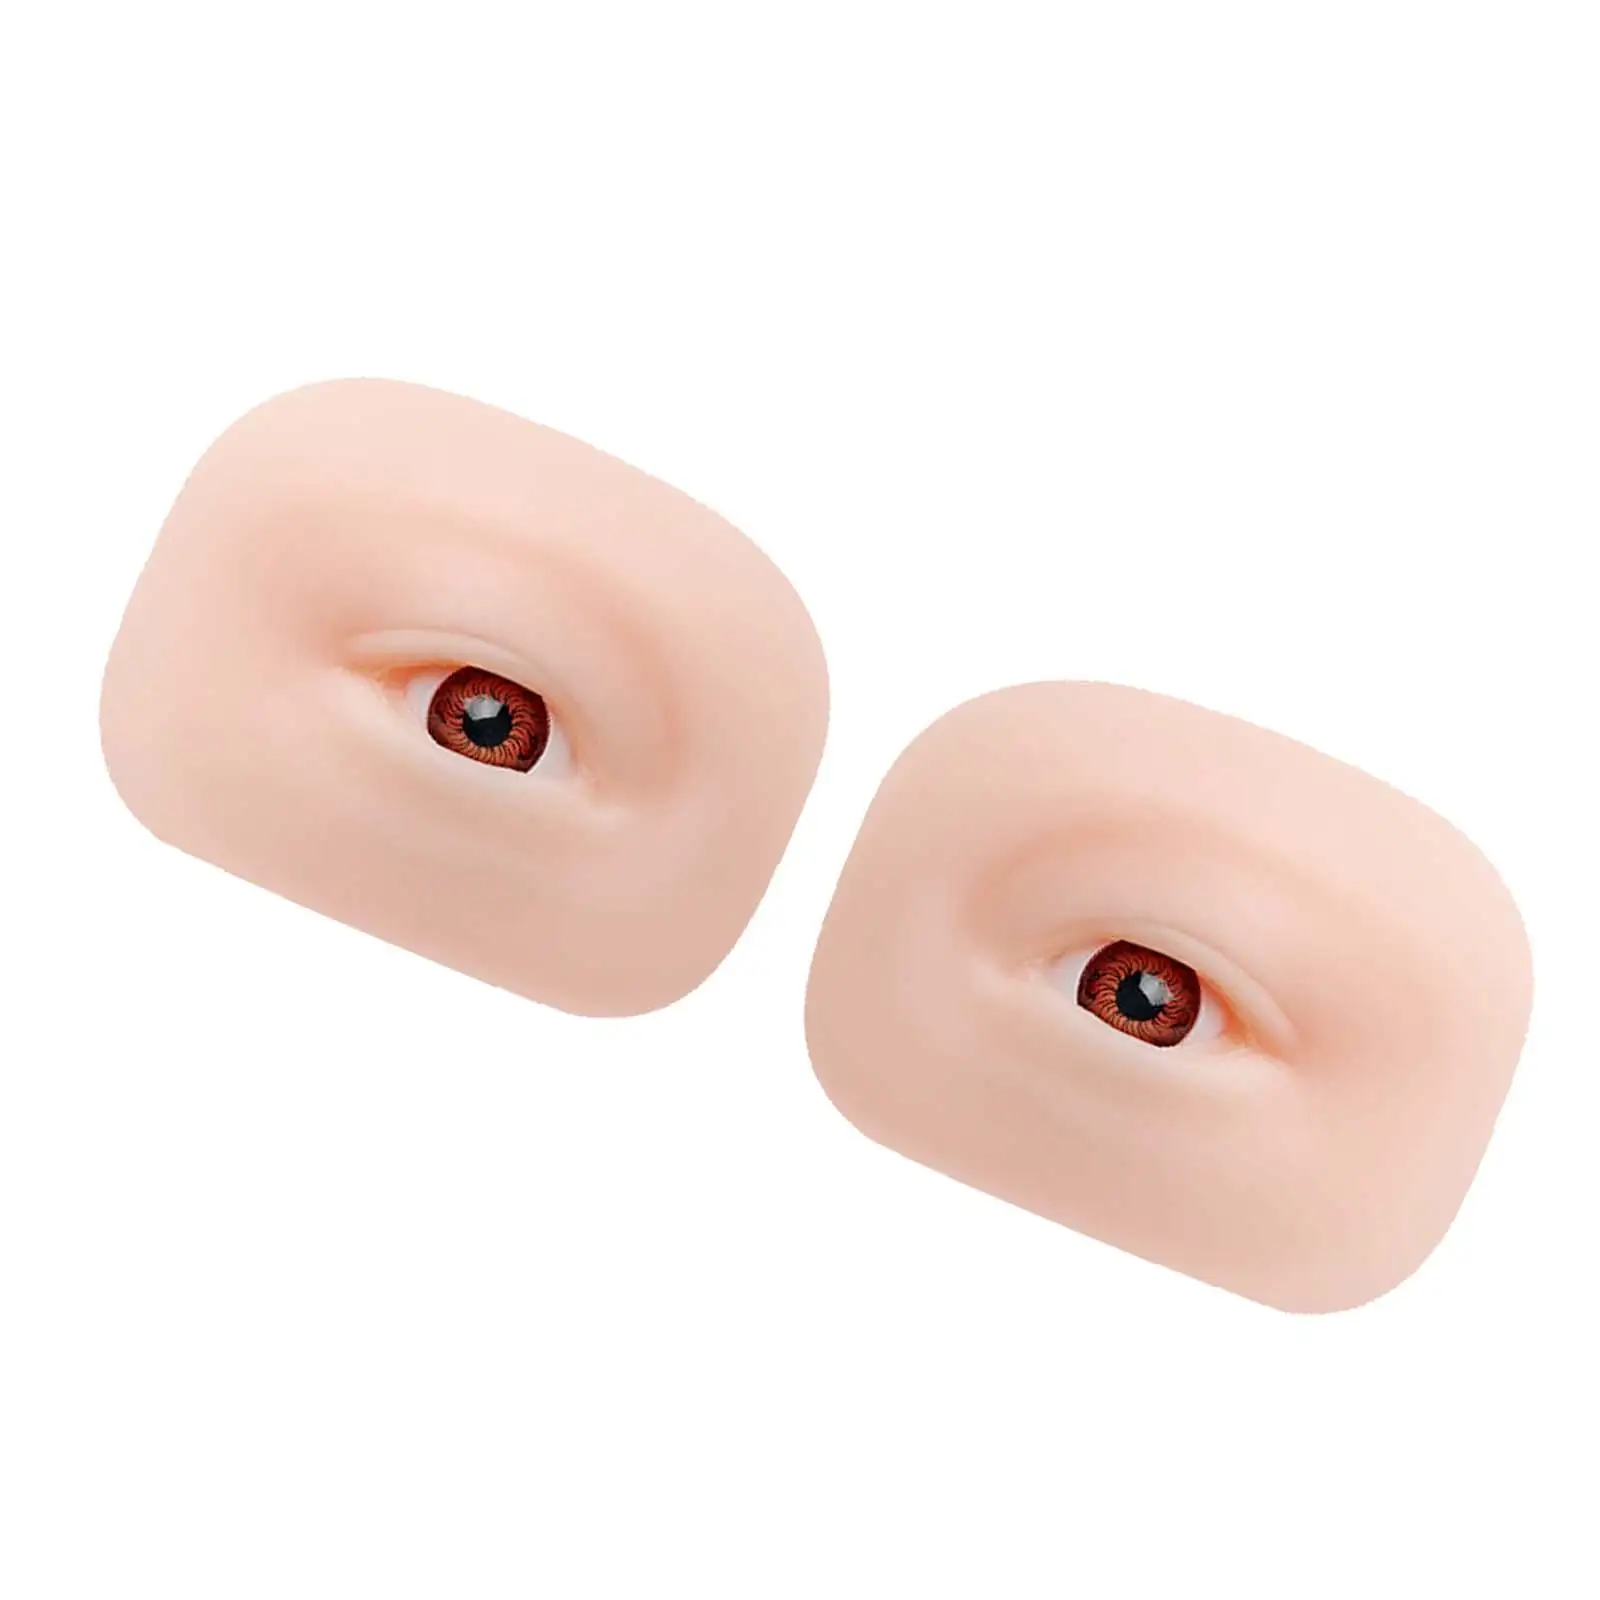 5D Silicone Eye Model Portable Resuable for Beginners Makeup Training Salon